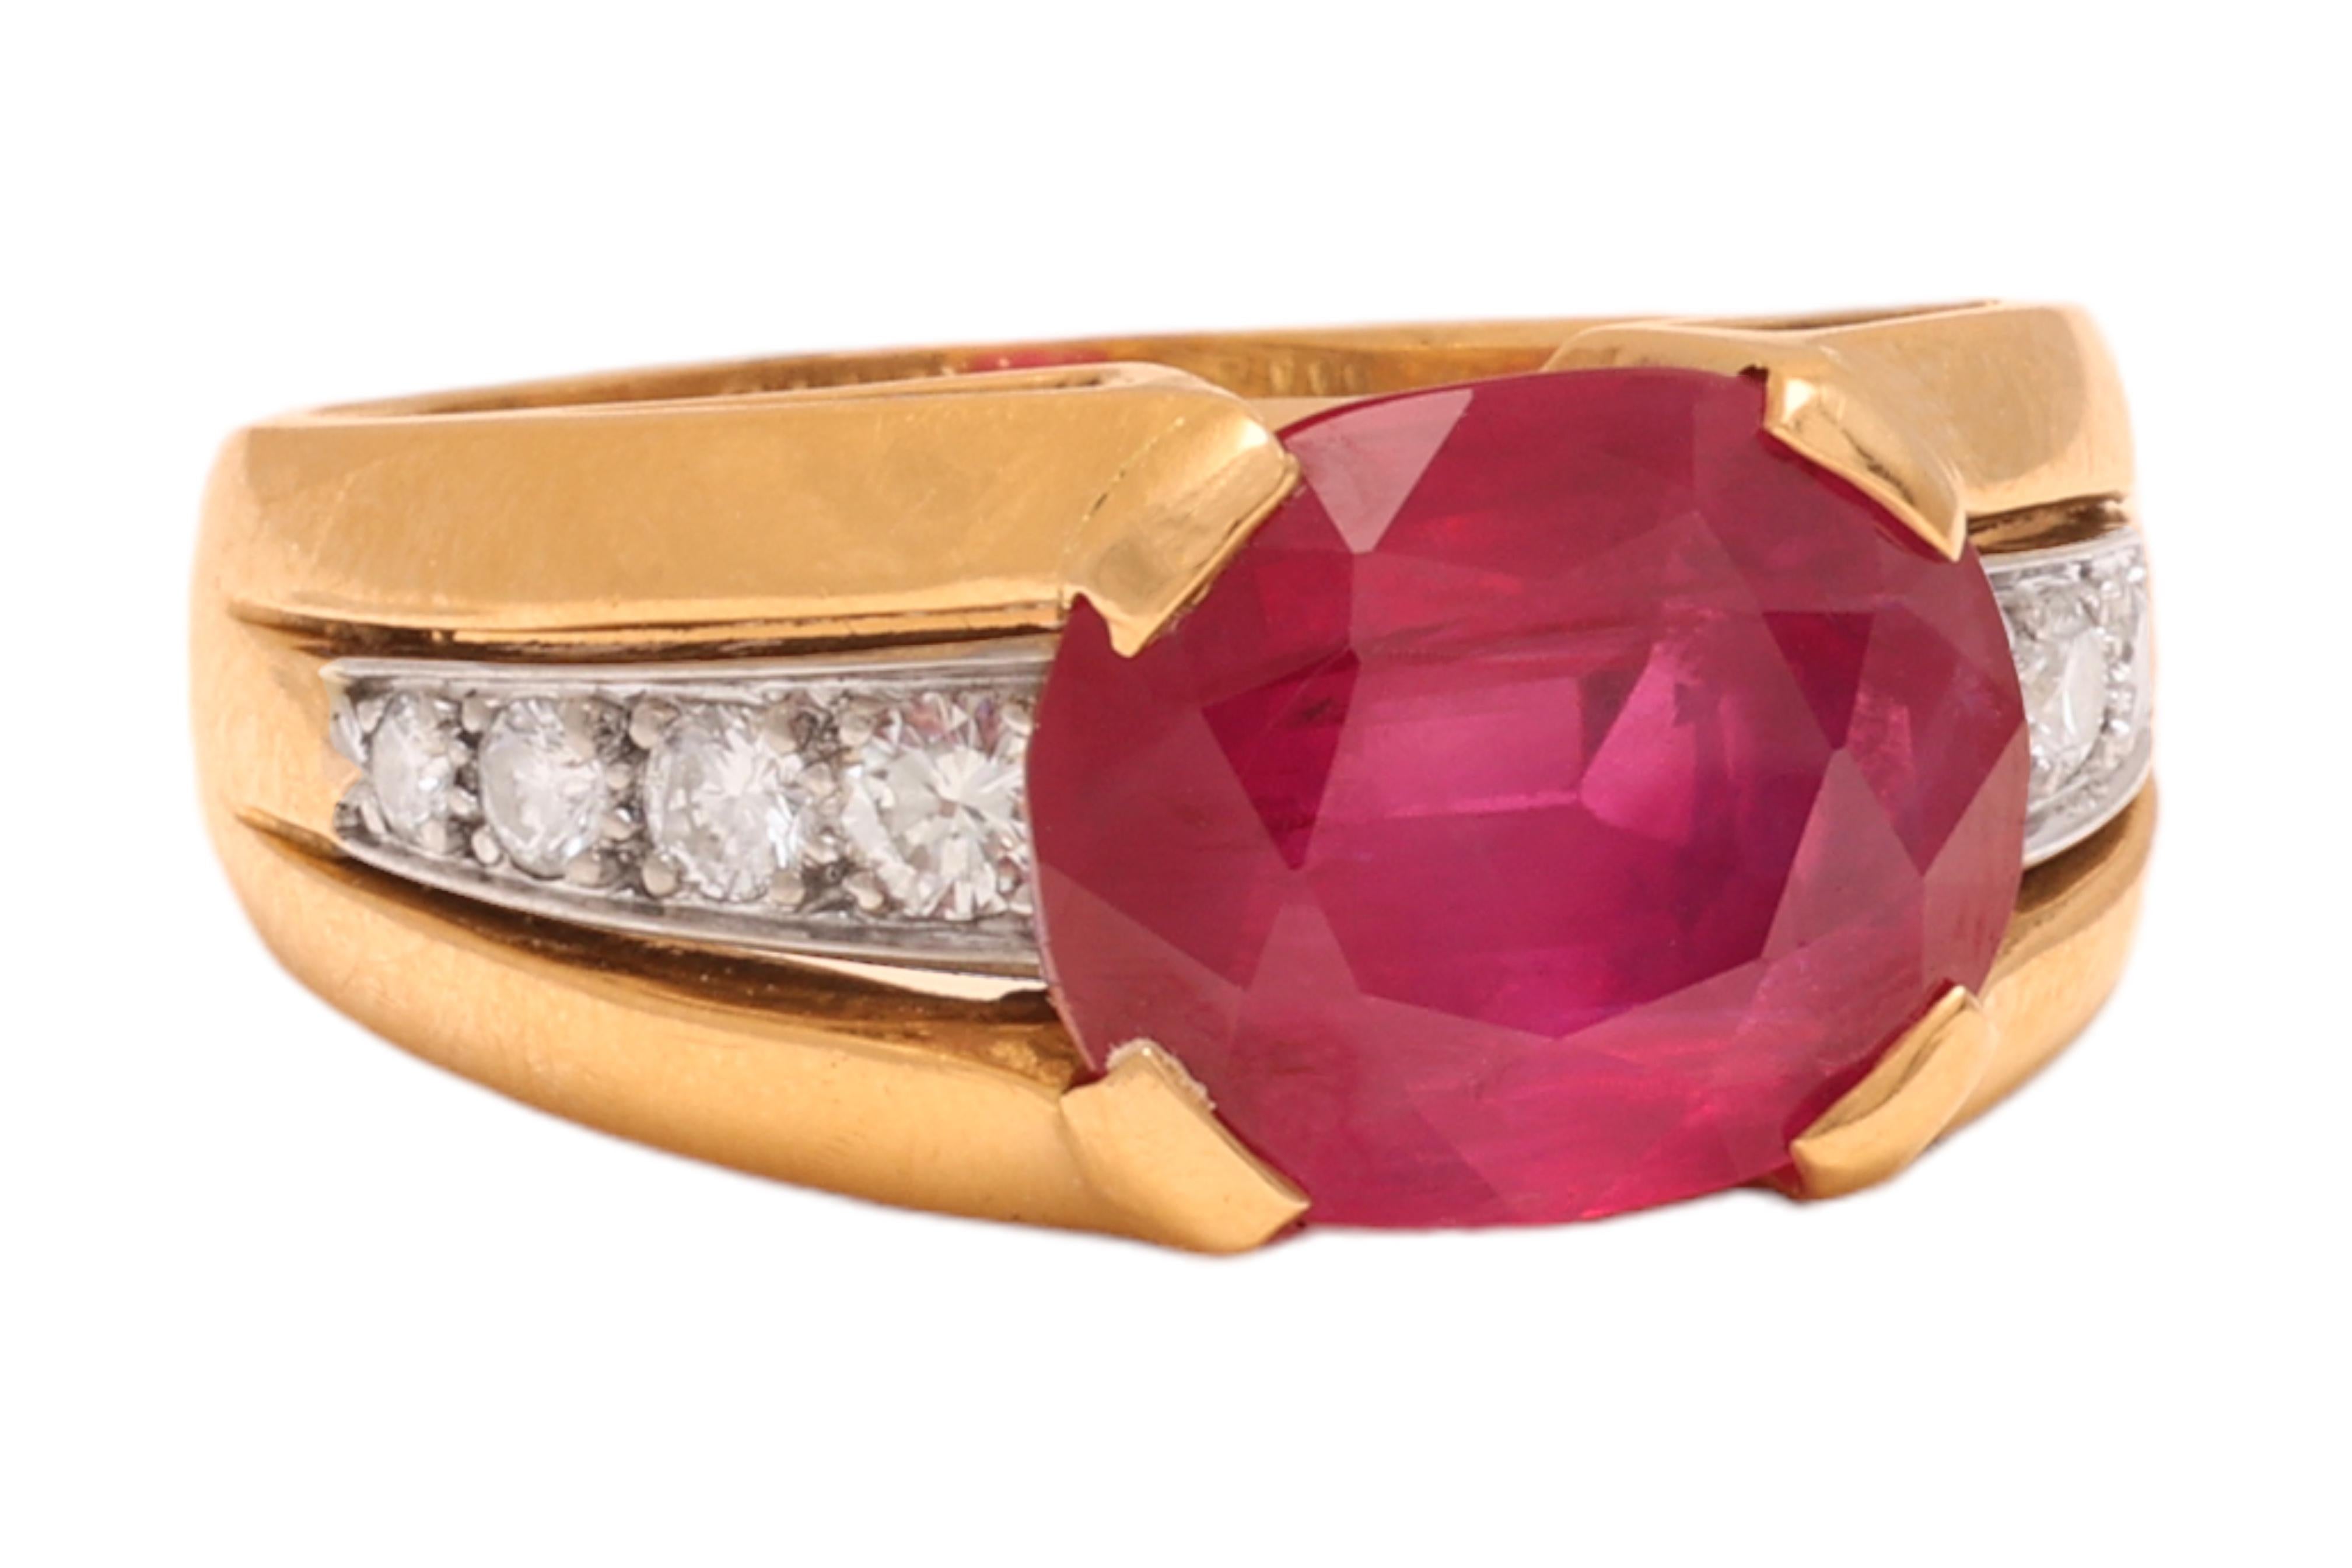 Magnificant 18 kt. Yellow Gold Ring With a 7.81 ct. Burmese No Heat Ruby 

The Ruby comes Certified by Gübelin & GRS 

Ruby: Pink - Red, Cushion - Oval shape, Burma Ruby 7.81 ct. No indication of Heating

Diamonds: Brilliant cut diamonds together